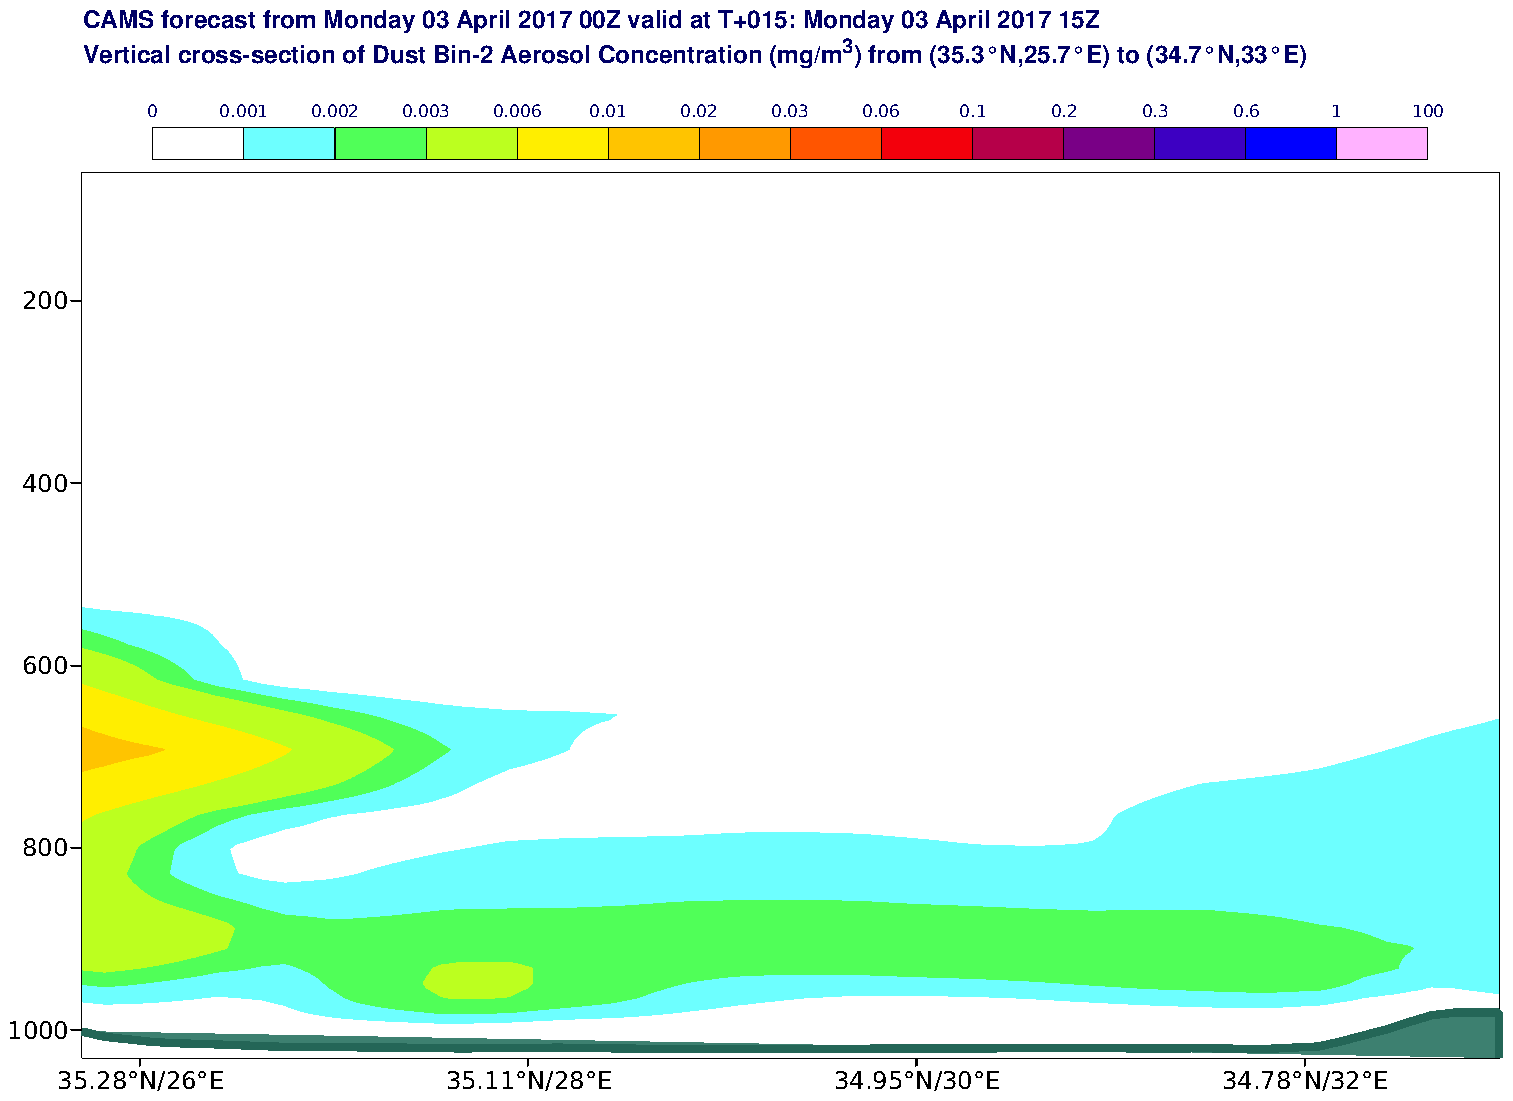 Vertical cross-section of Dust Bin-2 Aerosol Concentration (mg/m3) valid at T15 - 2017-04-03 15:00